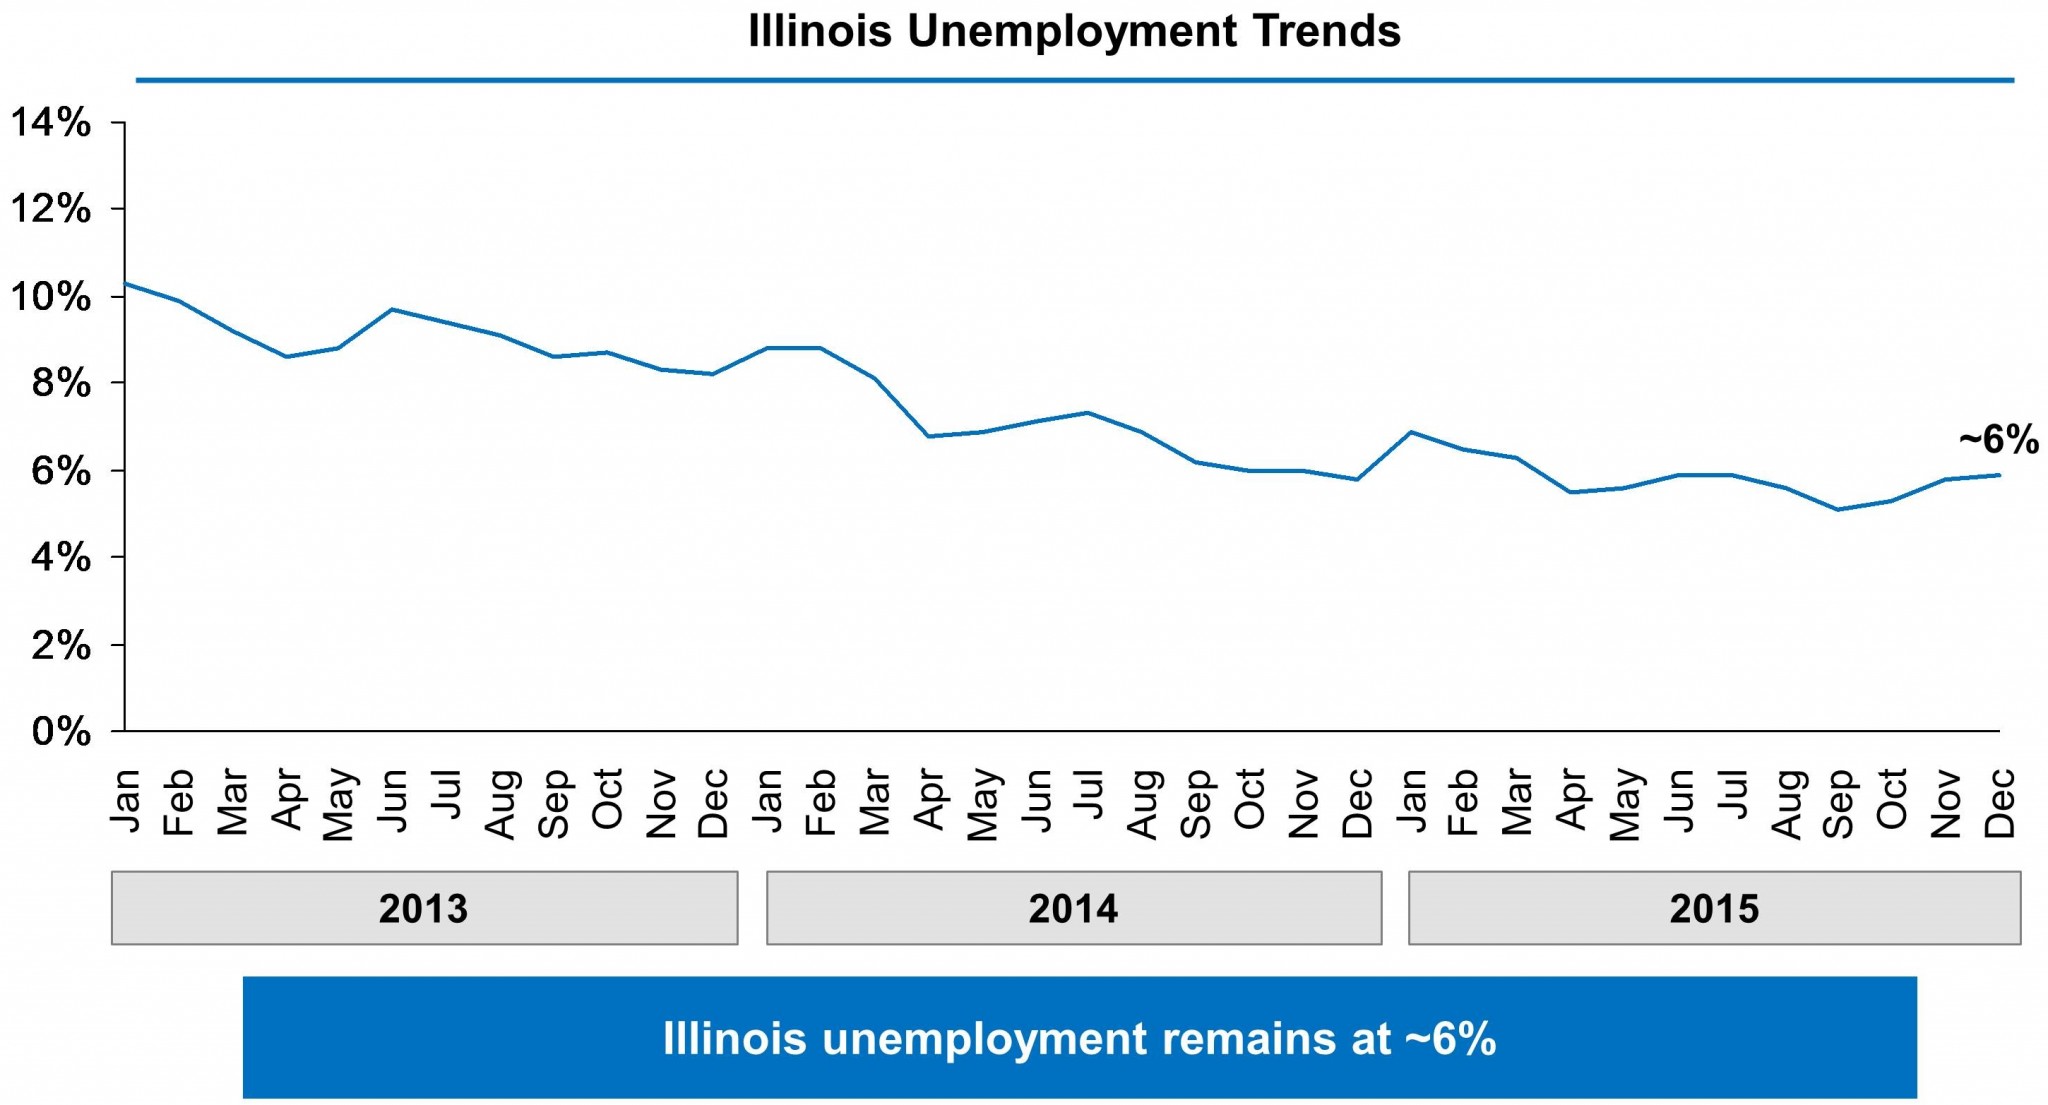 Chart showing Illinois' unemployment rate falling from 10% in January 2013 to approximately 6% in December 2015.